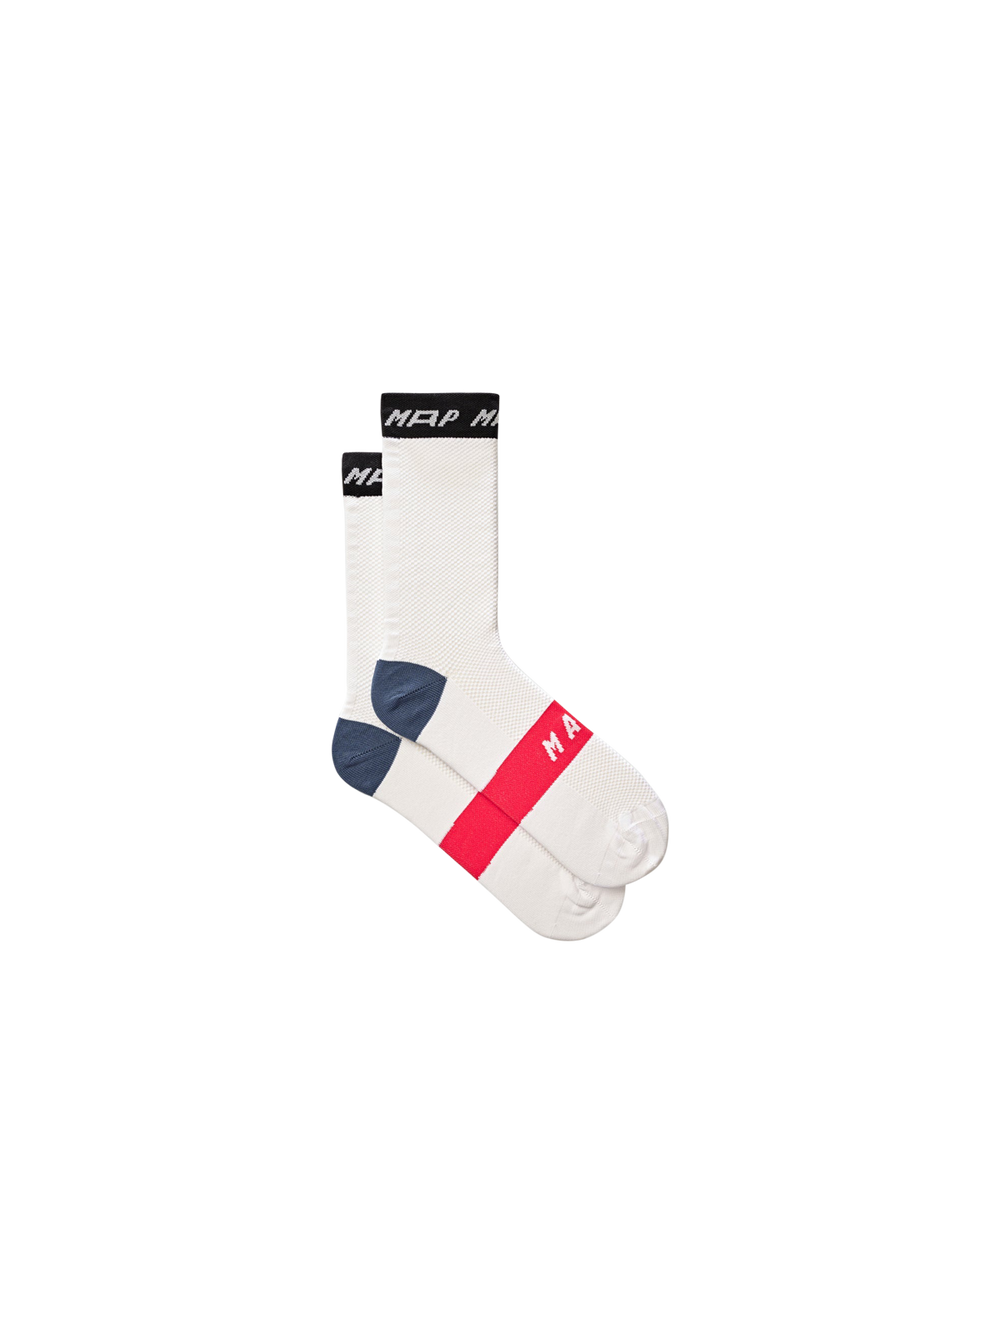 Product Image for Mode Sock